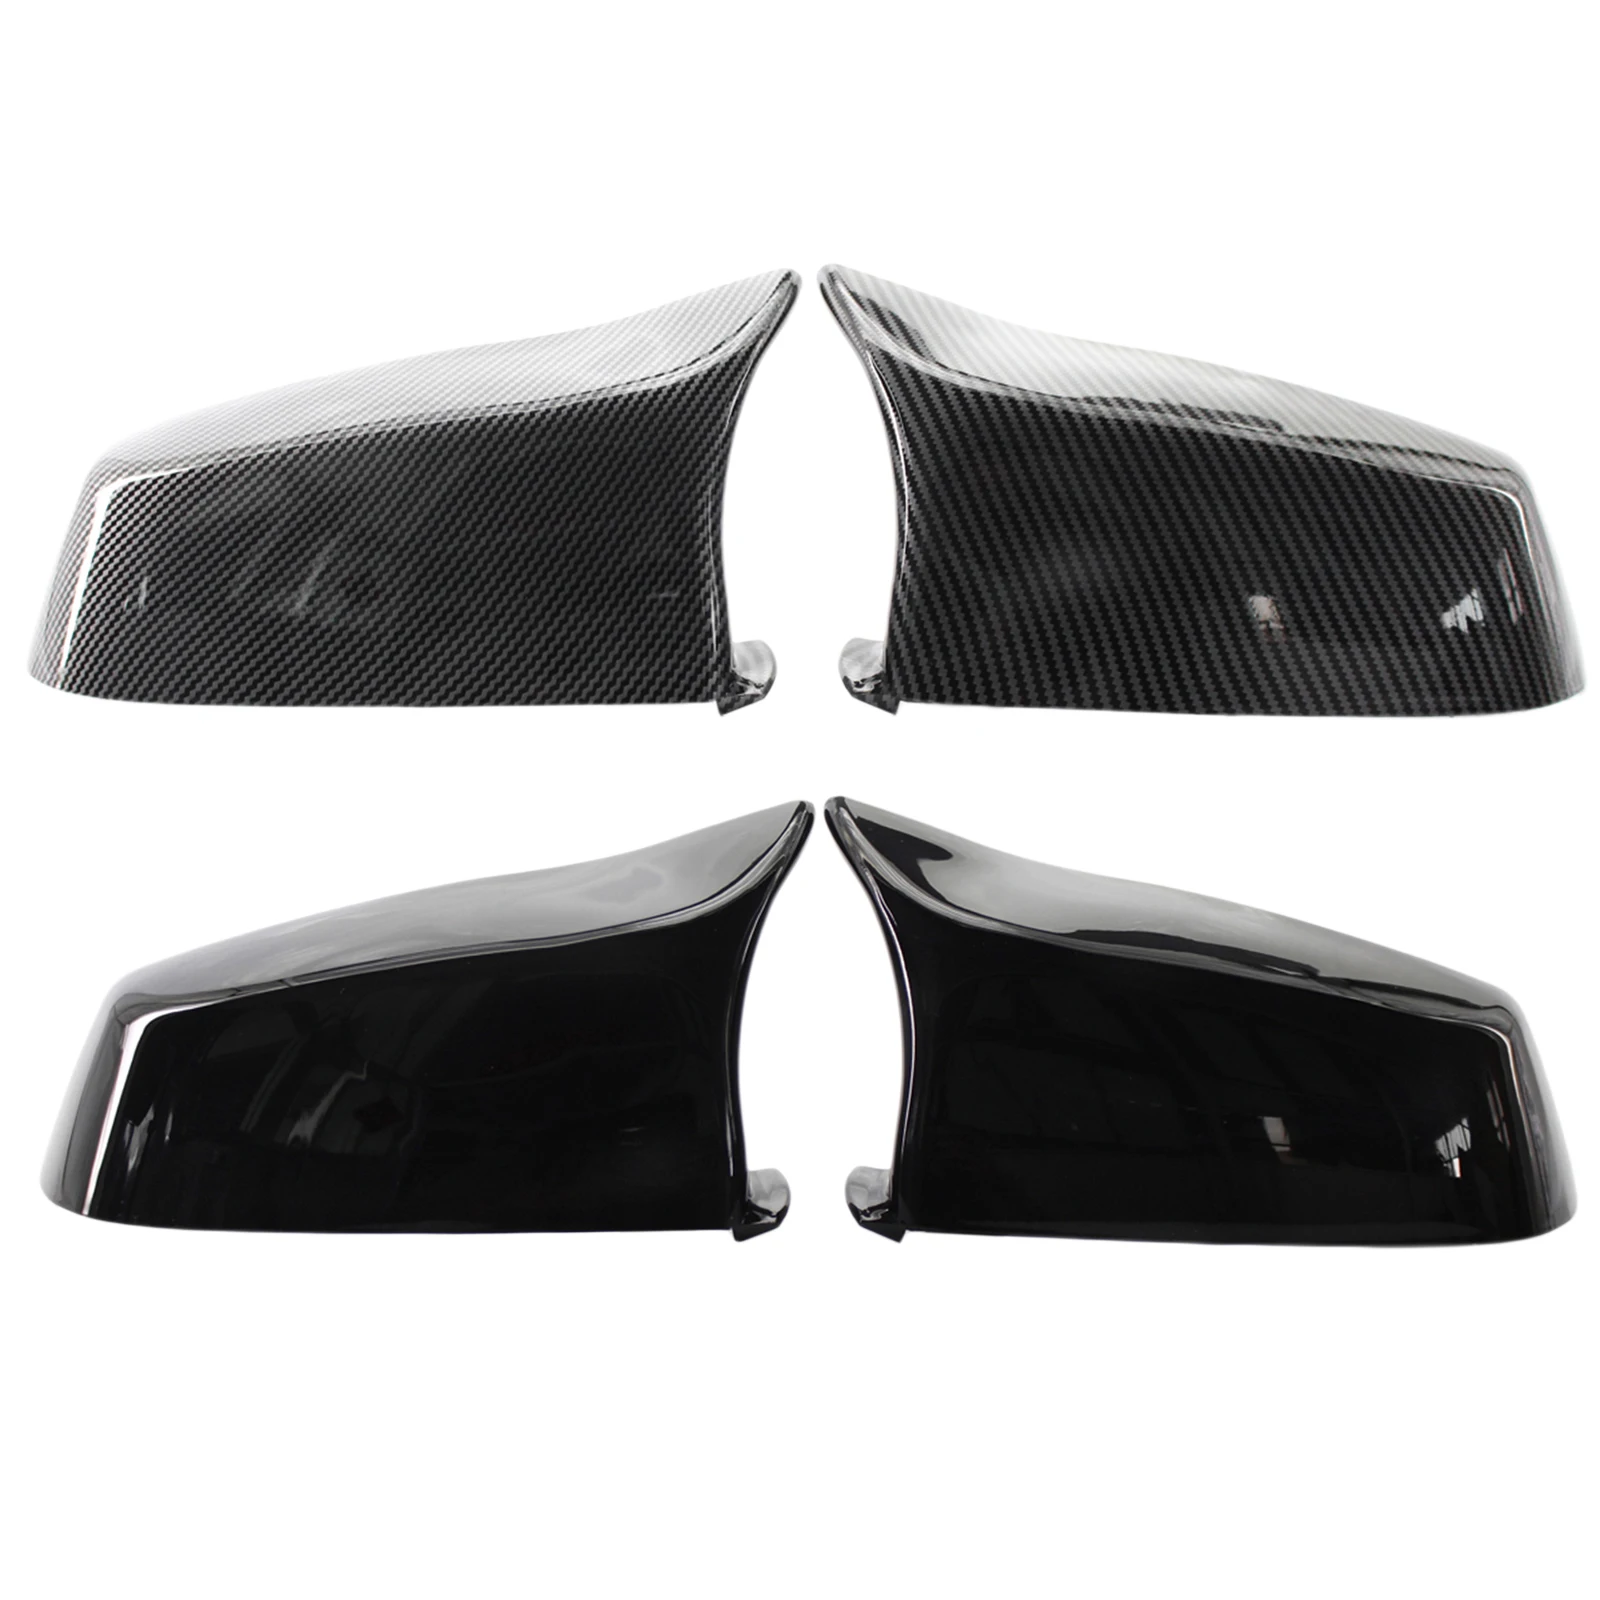 2x Car Rearview Mirror Cover Trim Replace Style For BMW E60 E61 F01 F02